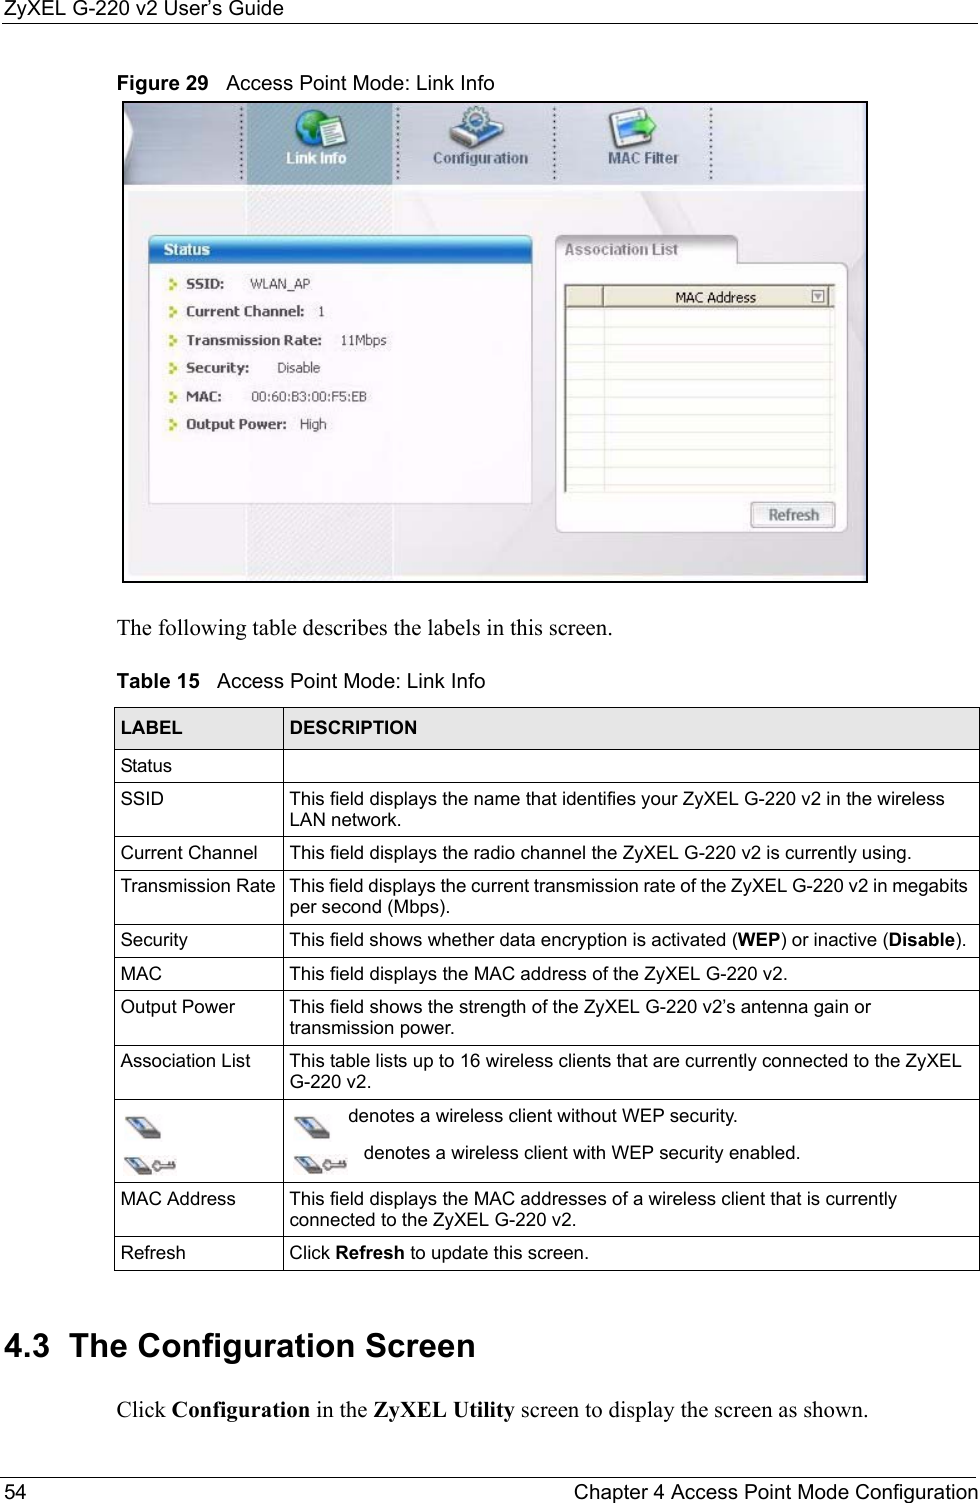 ZyXEL G-220 v2 User’s Guide54 Chapter 4 Access Point Mode ConfigurationFigure 29   Access Point Mode: Link Info The following table describes the labels in this screen. 4.3  The Configuration Screen Click Configuration in the ZyXEL Utility screen to display the screen as shown.Table 15   Access Point Mode: Link Info LABEL DESCRIPTIONStatusSSID This field displays the name that identifies your ZyXEL G-220 v2 in the wireless LAN network.Current Channel  This field displays the radio channel the ZyXEL G-220 v2 is currently using.Transmission Rate This field displays the current transmission rate of the ZyXEL G-220 v2 in megabits per second (Mbps).Security This field shows whether data encryption is activated (WEP) or inactive (Disable).MAC This field displays the MAC address of the ZyXEL G-220 v2.Output Power  This field shows the strength of the ZyXEL G-220 v2’s antenna gain or transmission power.Association List This table lists up to 16 wireless clients that are currently connected to the ZyXEL G-220 v2.   denotes a wireless client without WEP security.   denotes a wireless client with WEP security enabled. MAC Address  This field displays the MAC addresses of a wireless client that is currently connected to the ZyXEL G-220 v2.Refresh Click Refresh to update this screen.